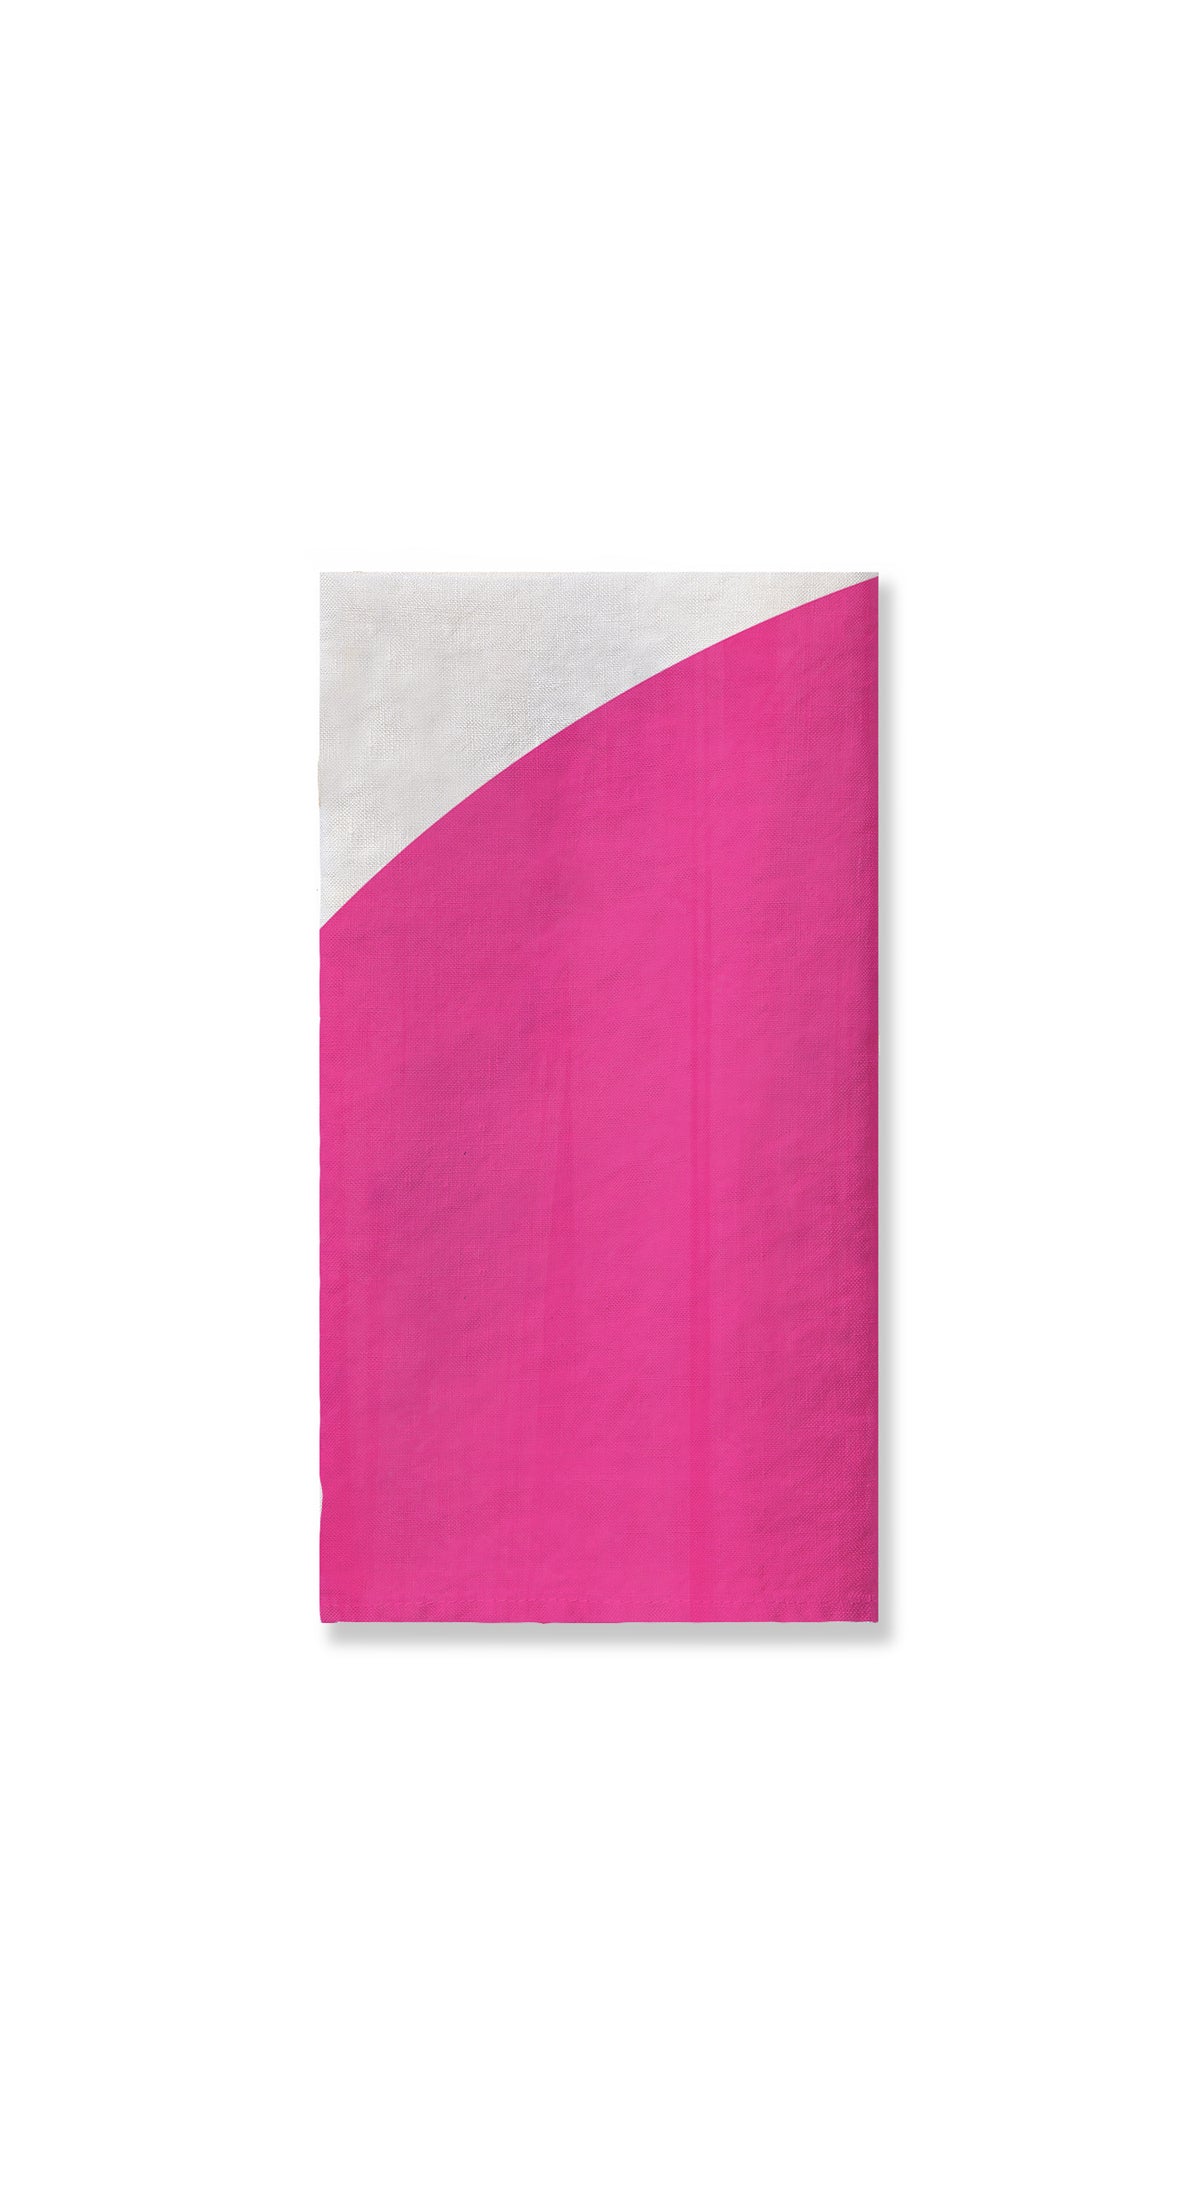 Summerill & Bishop x The River Cafe Linen Napkin in Blue, Pink & Yellow, 50x50cm